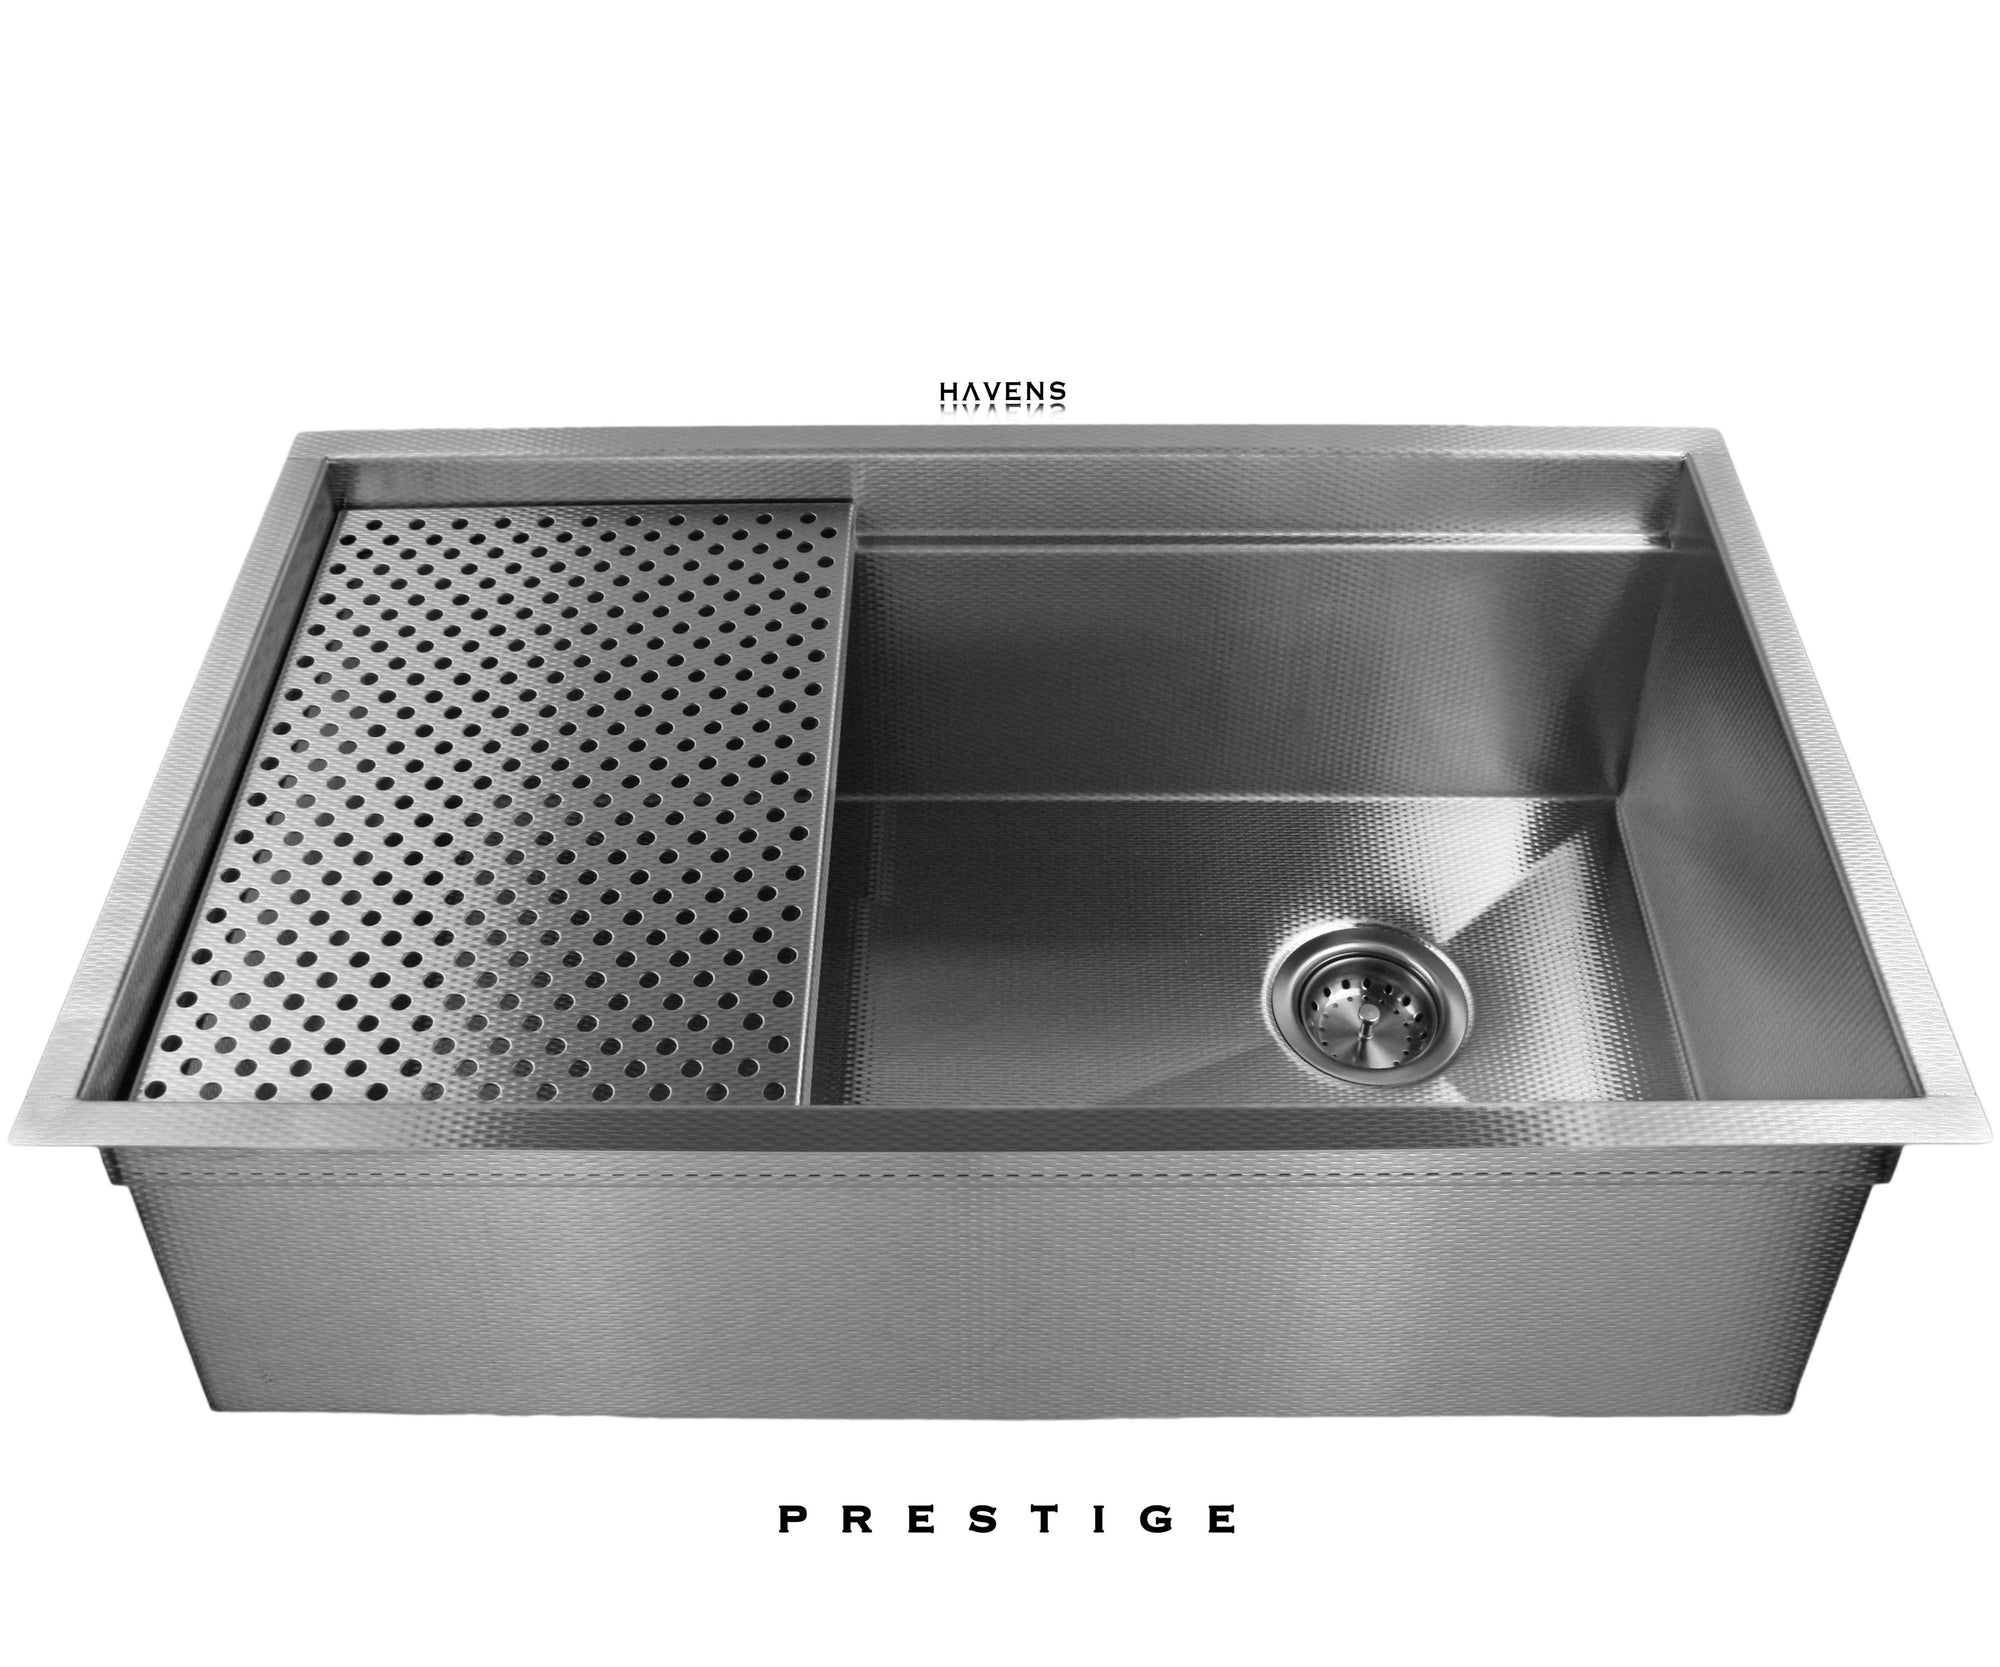 Undermount stainless steel kitchen sink made from 16 gauge steel. Textured stainless sink with a chrome faucet. 